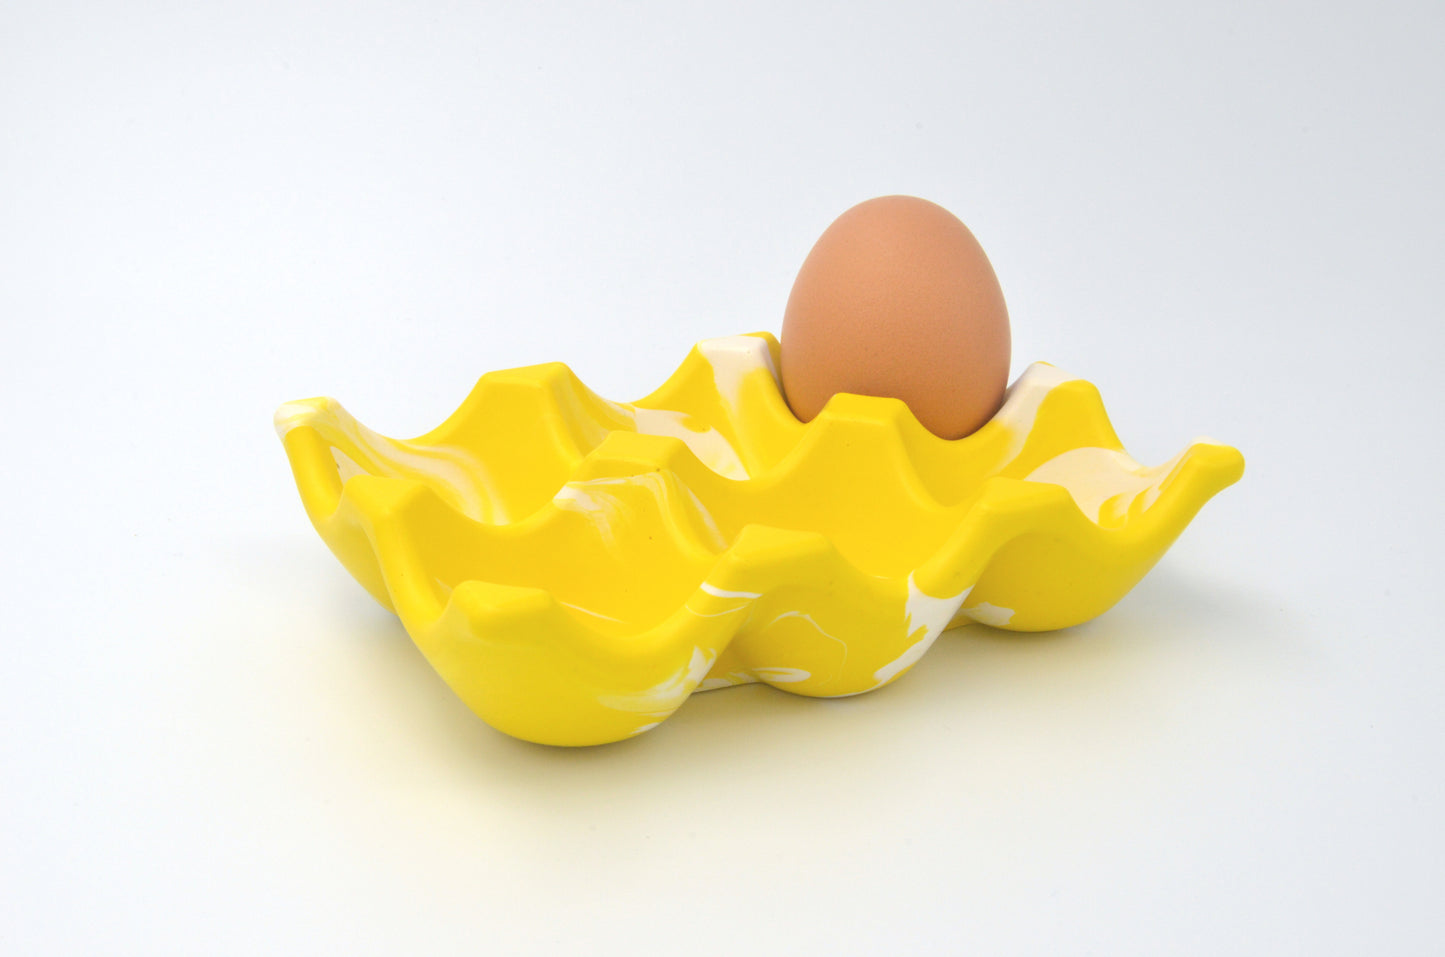 Countertop Egg Holder in Yellow and White Stone